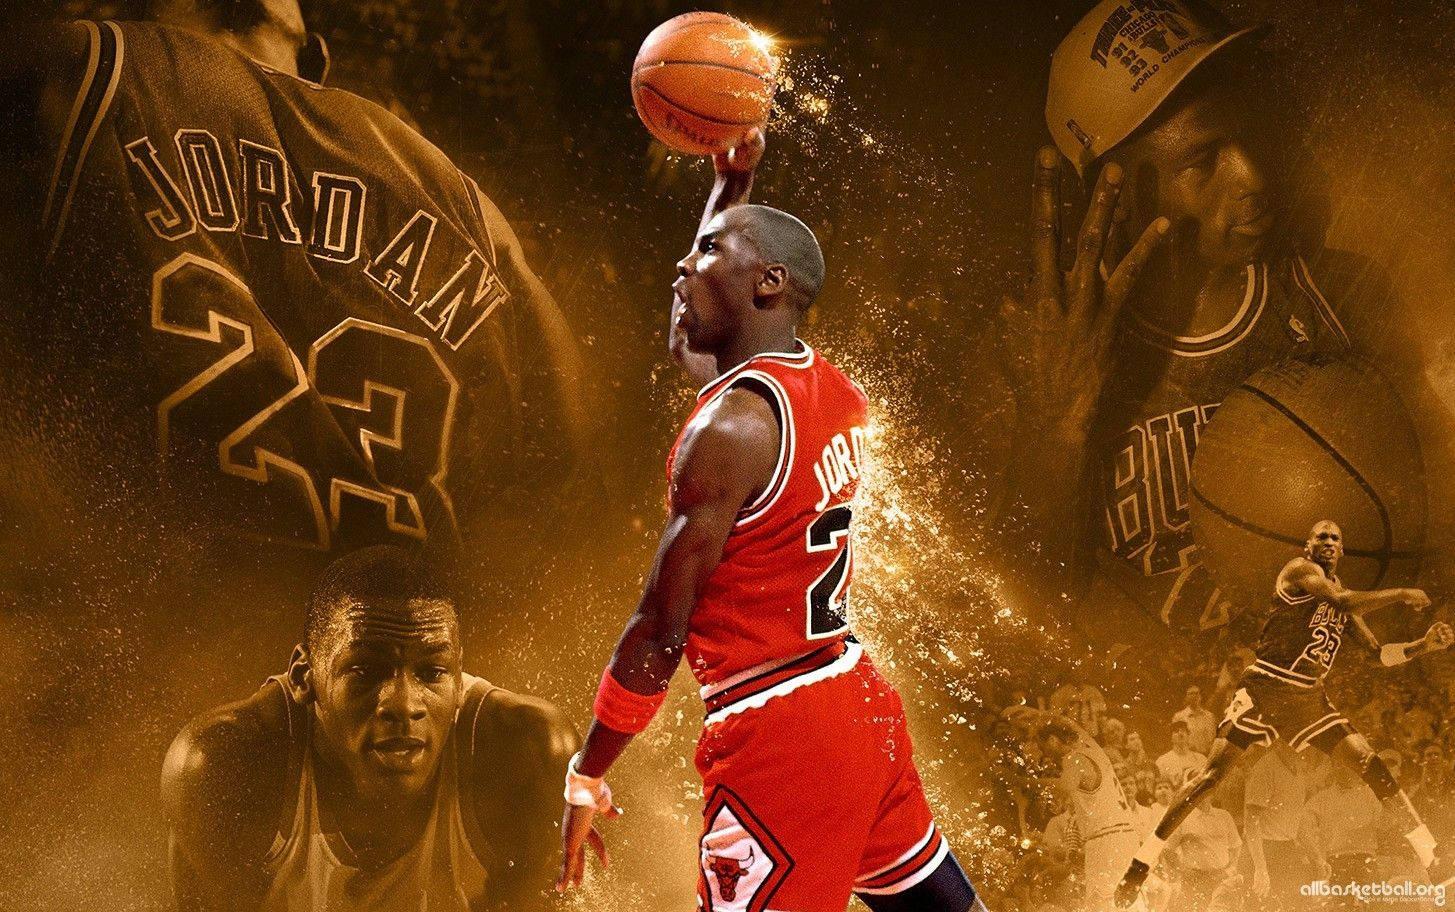 Download The legendary Michael Jordan is the cover athlete for NBA